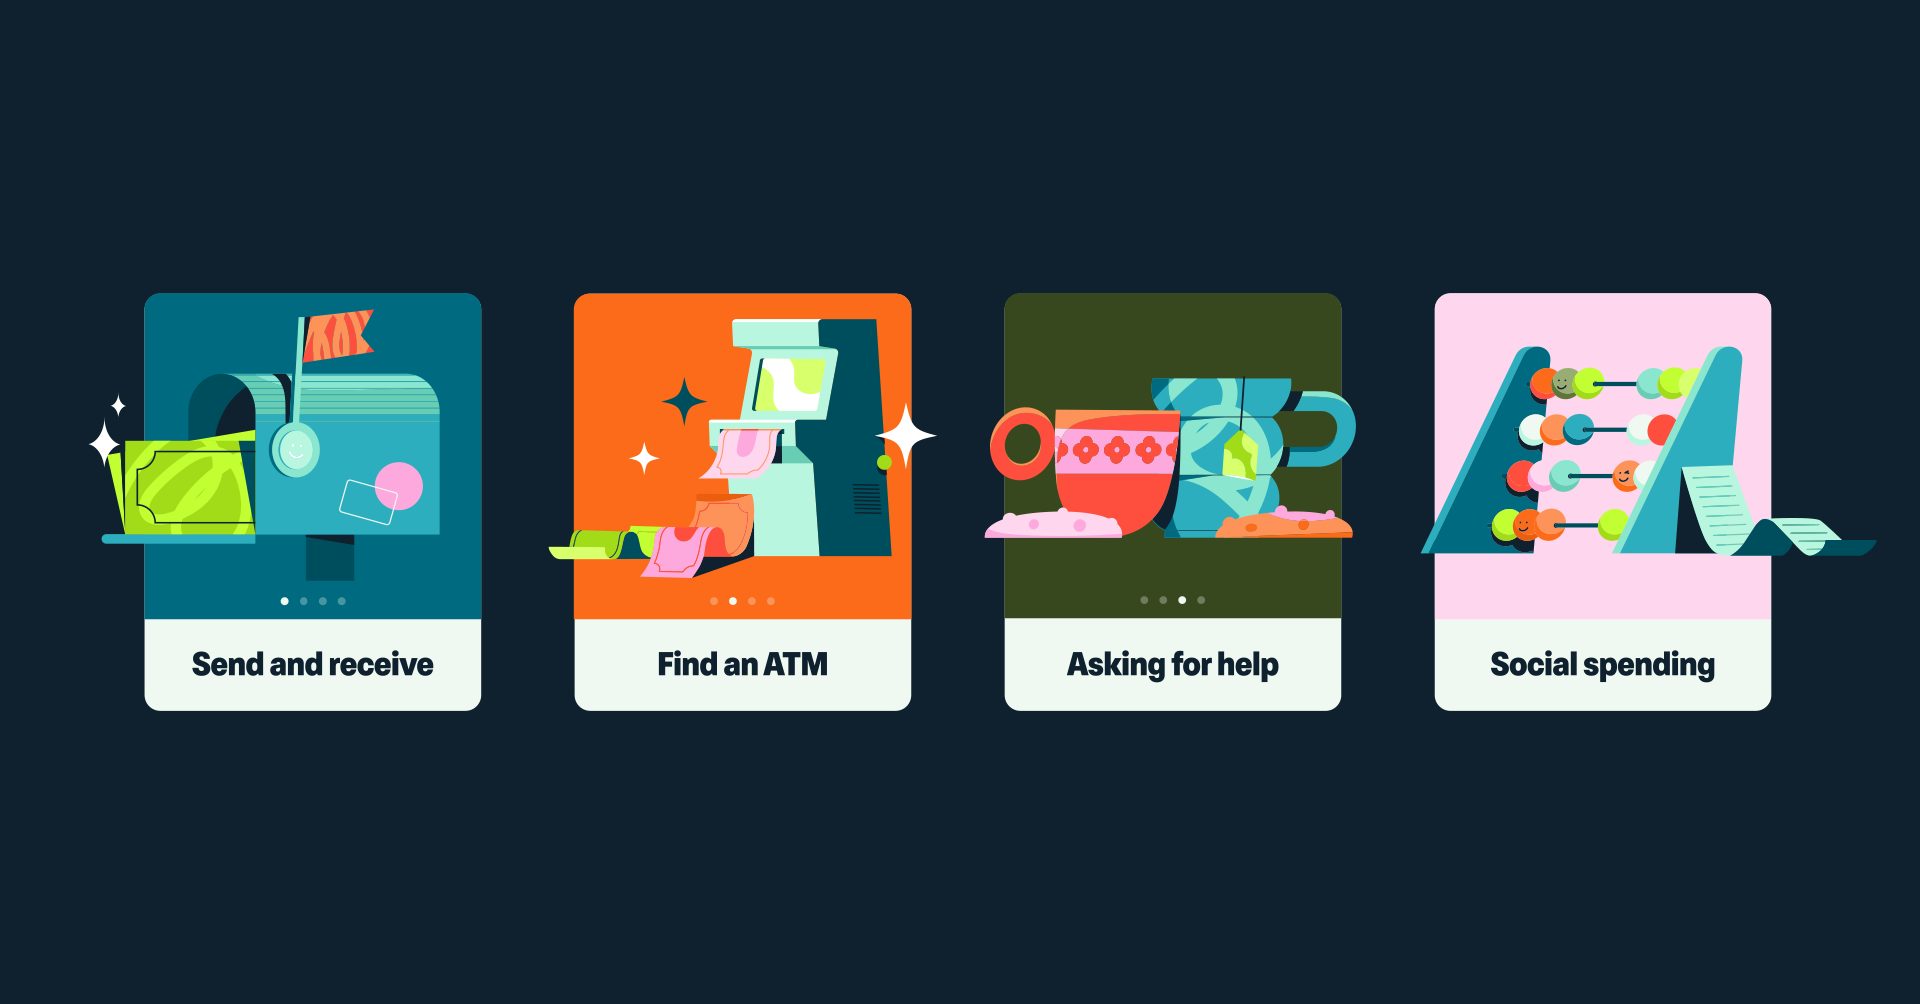 Image shows four Monzo graphics, which read 'Send and receive', 'Find an ATM', 'Asking for help', and 'Social spending'